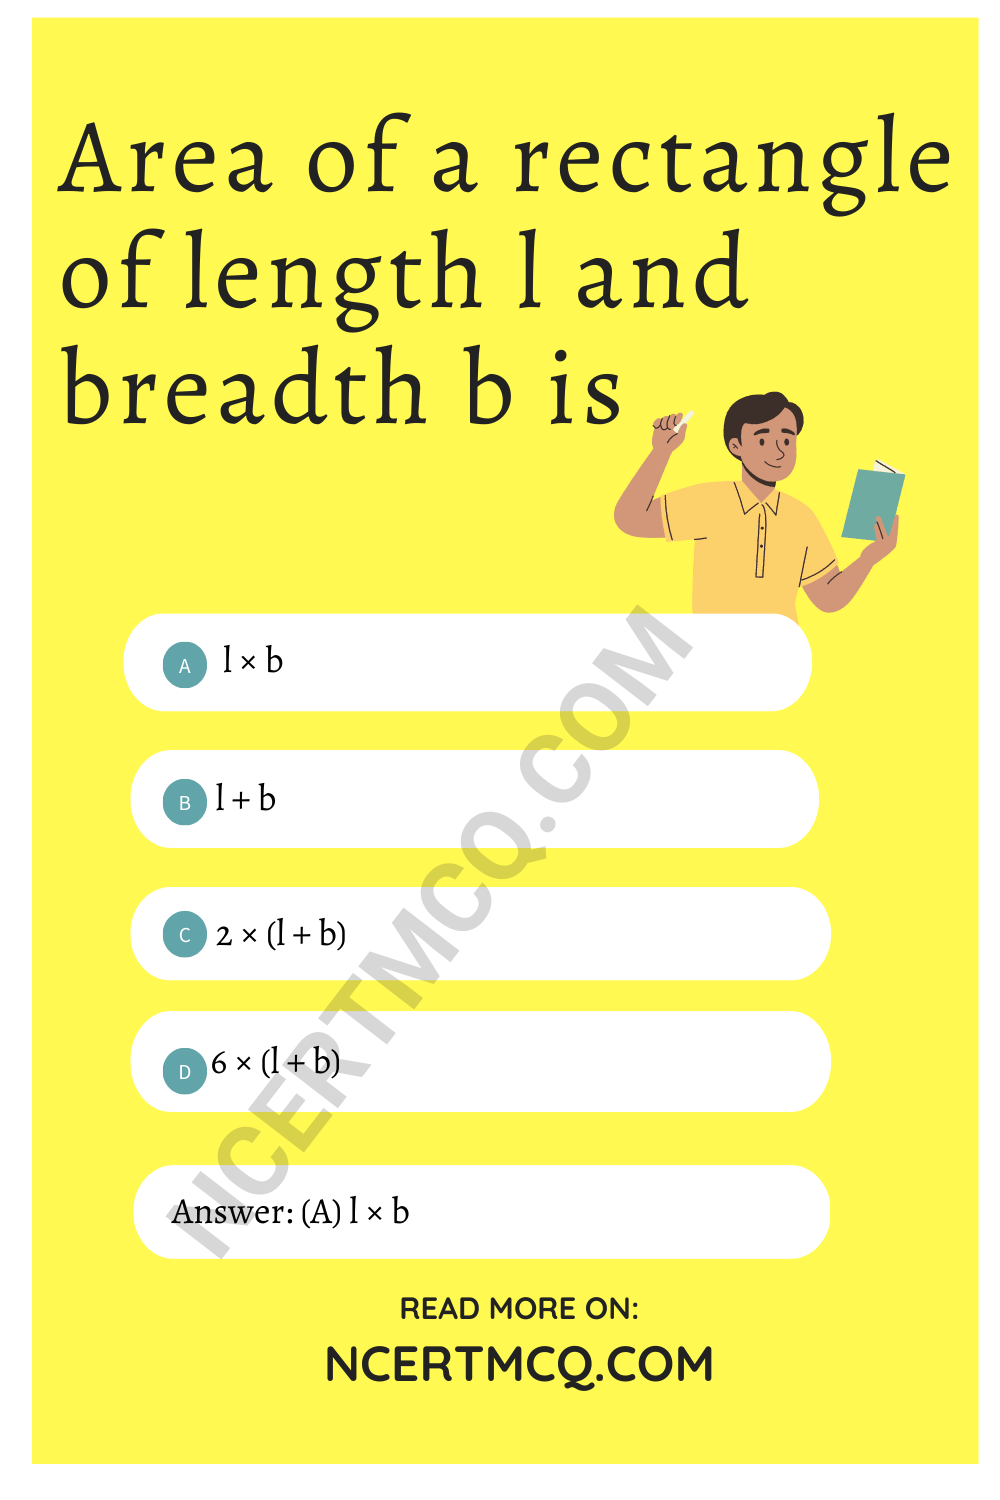 Area of a rectangle of length l and breadth b is